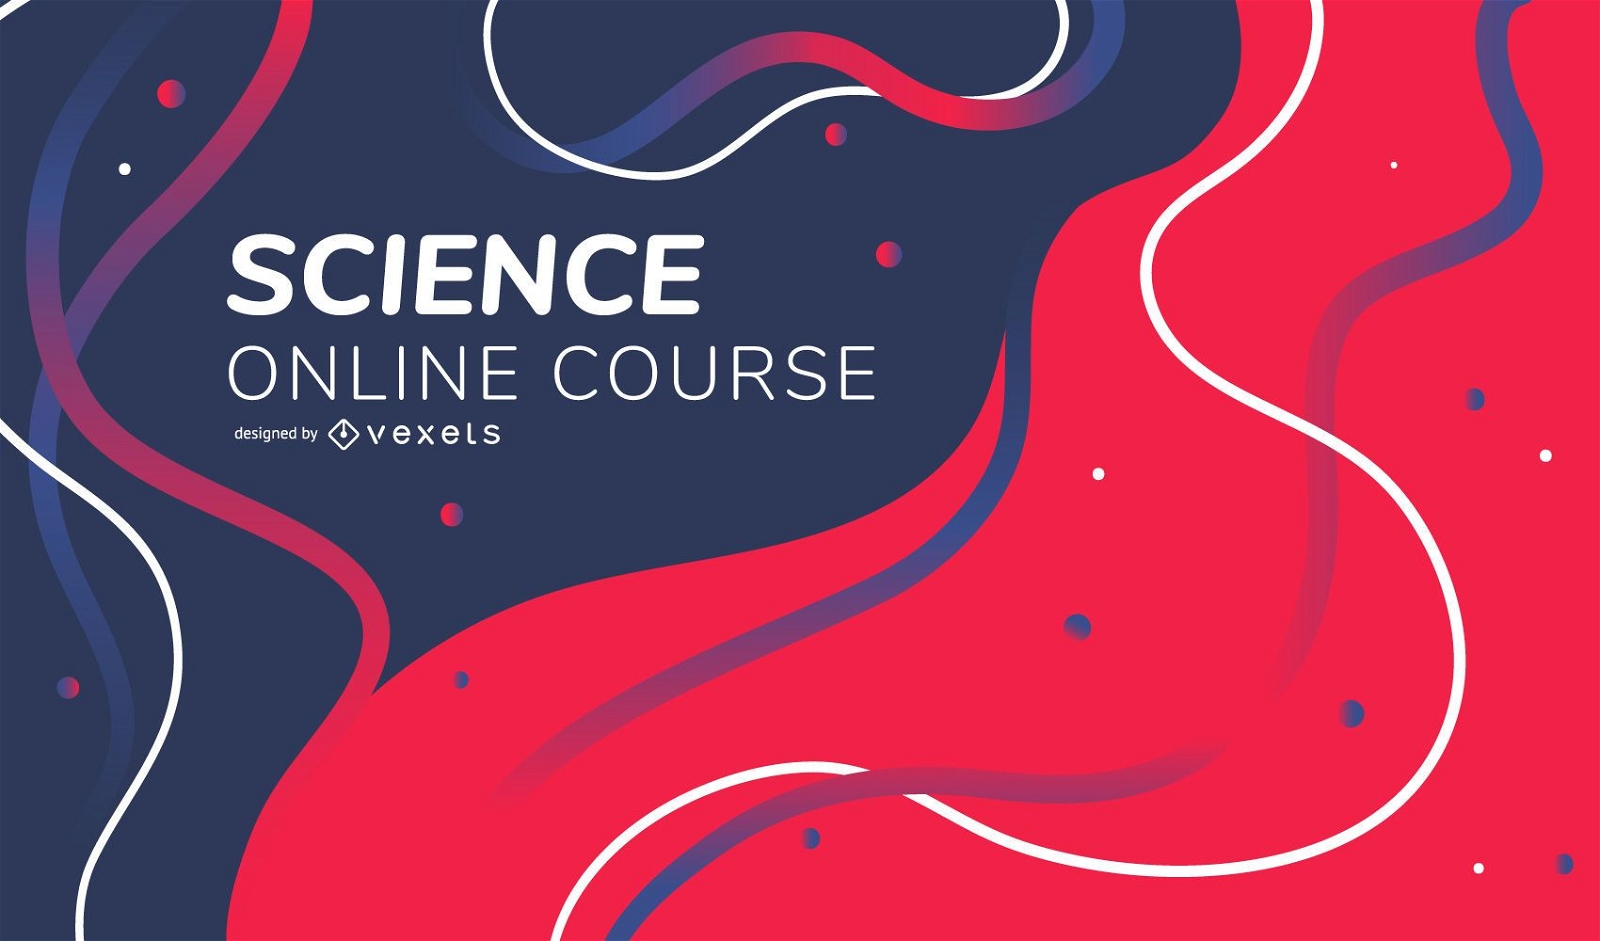 Science online course abstract cover